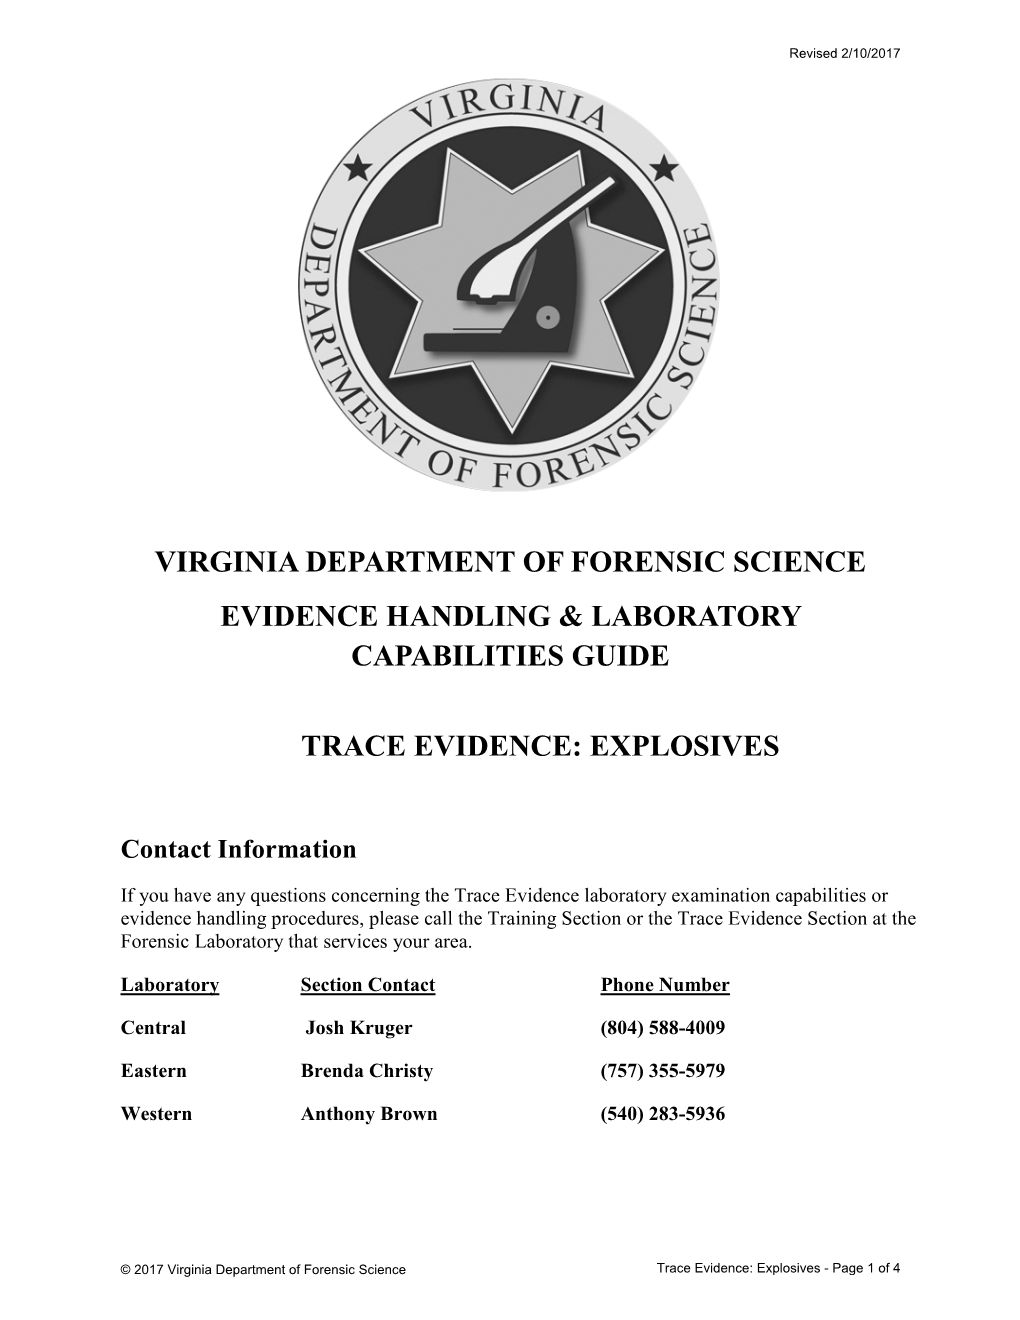 Trace Evidence – Explosives